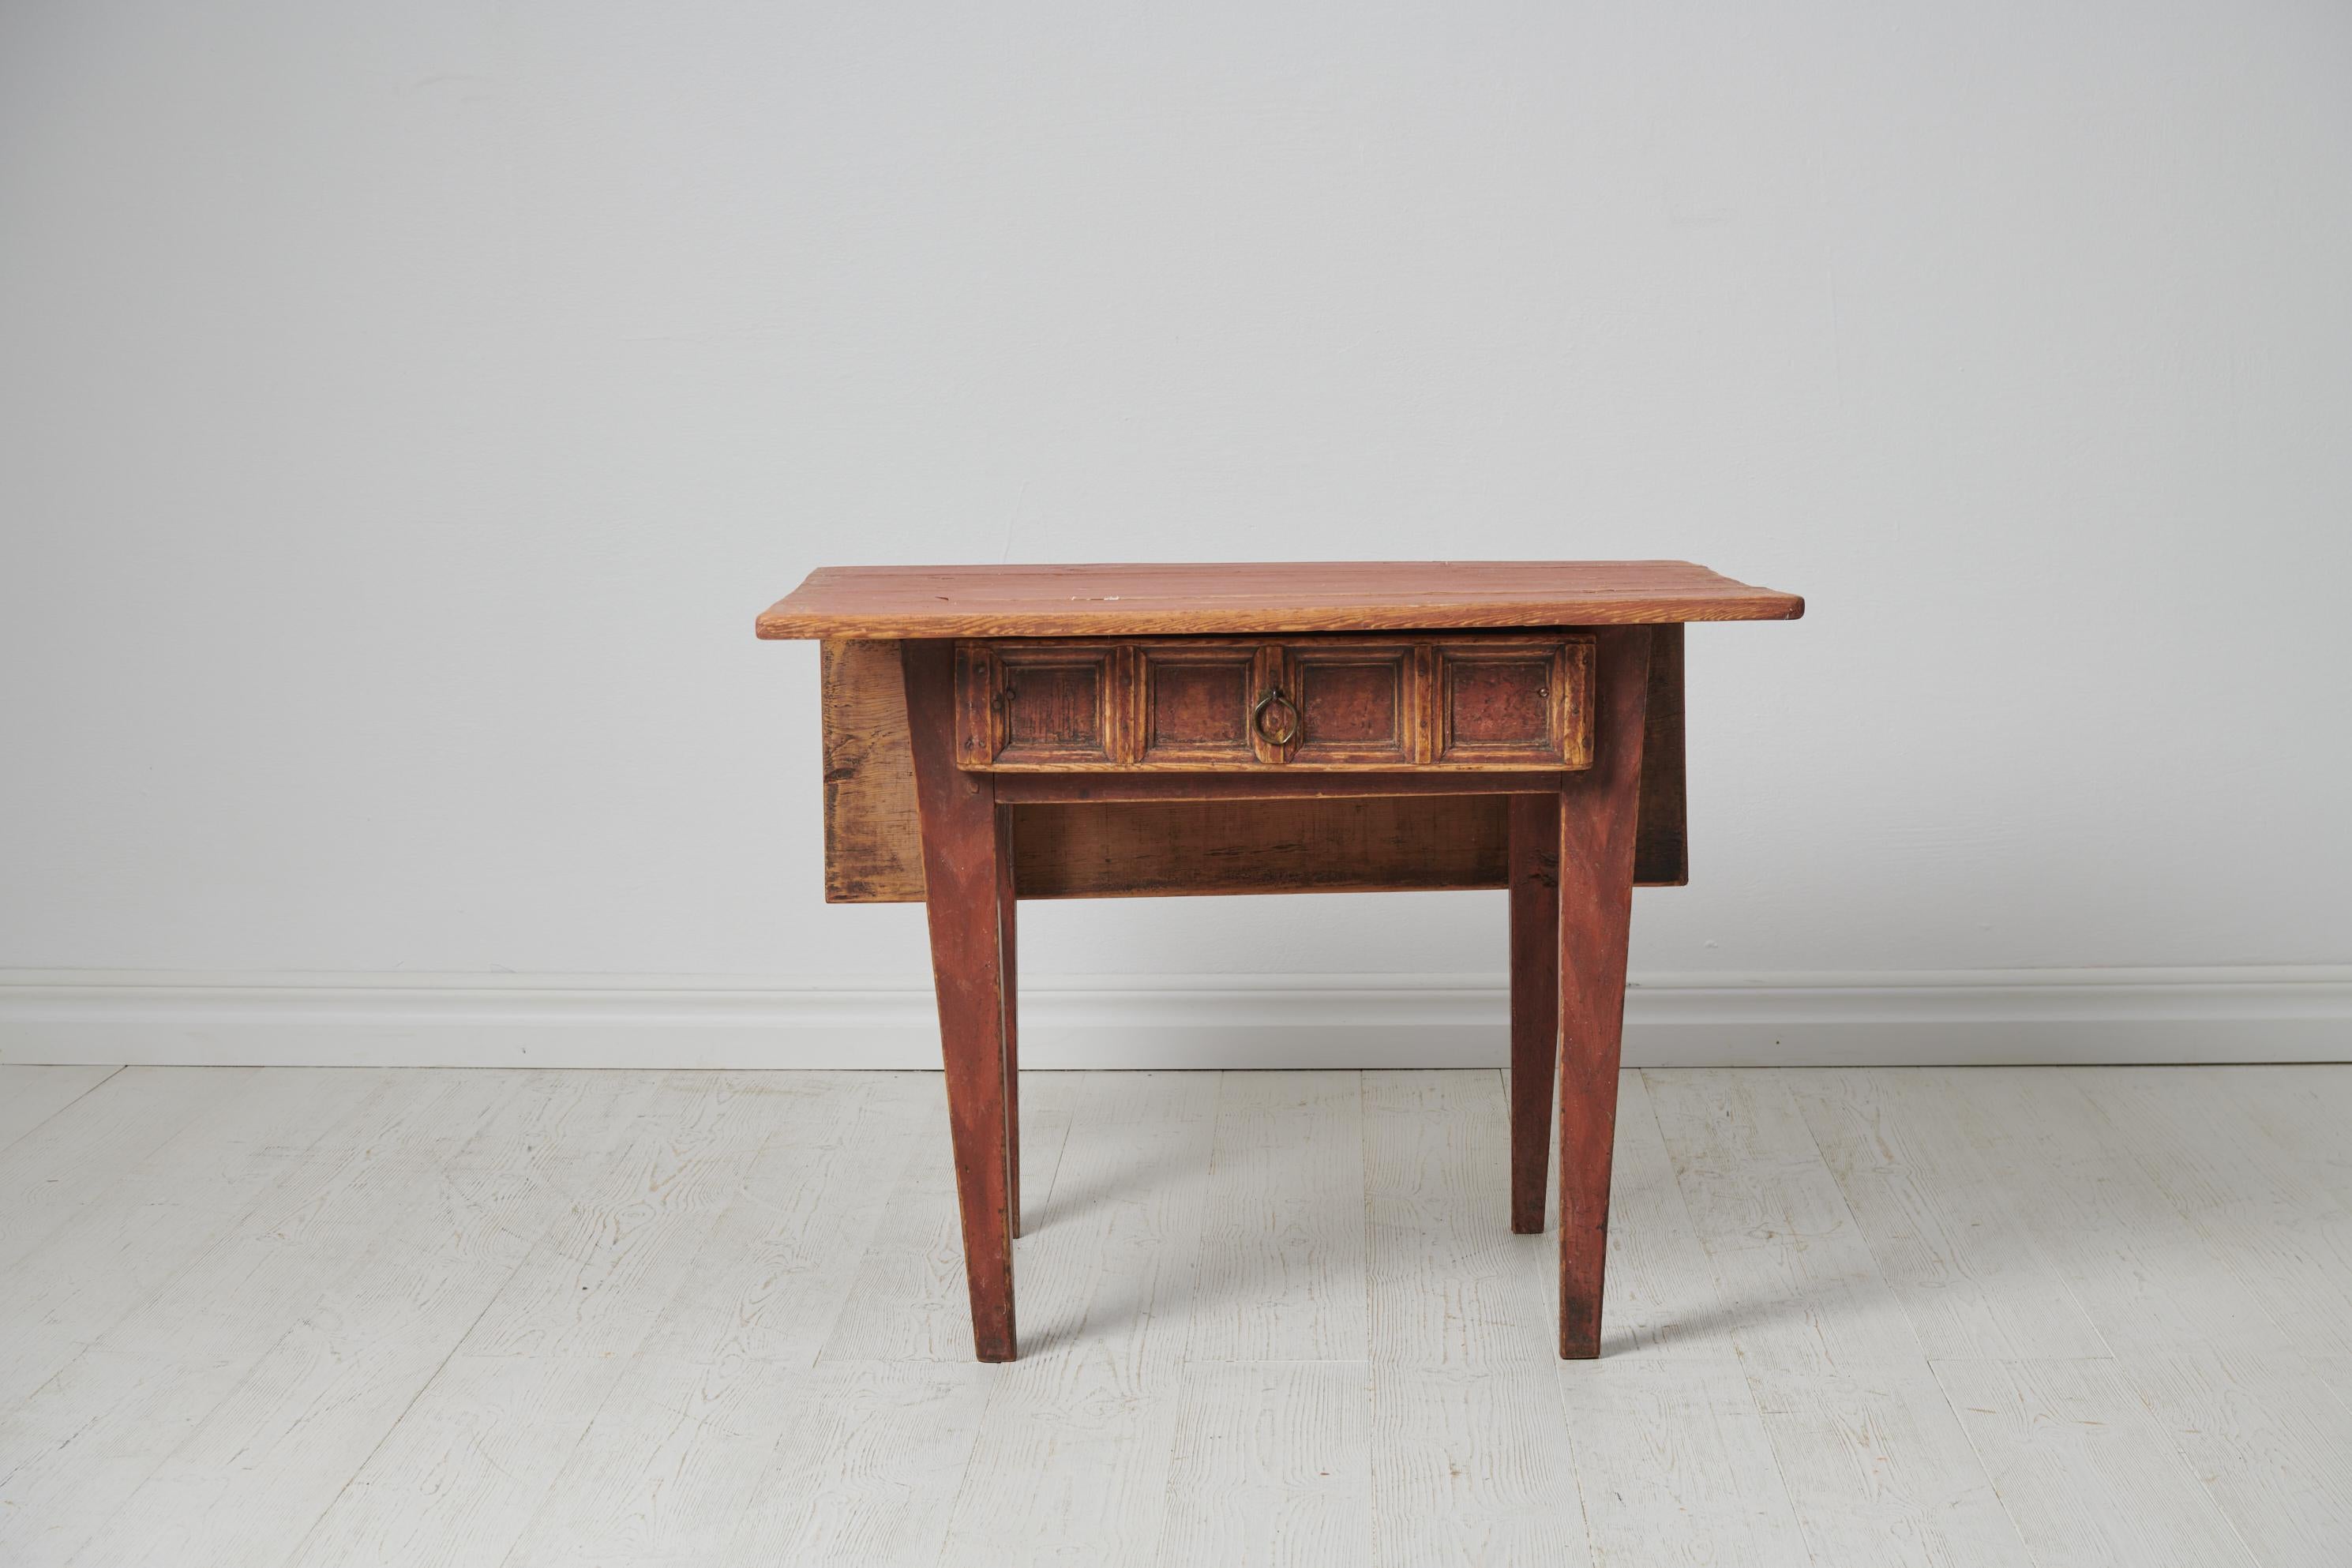 Small charming country table from northern Sweden. The table is a genuine folk art furniture from around 1790 to 1810. It is made by hand in solid pine. The table is in untouched condition with the original paint which has genuine distress and